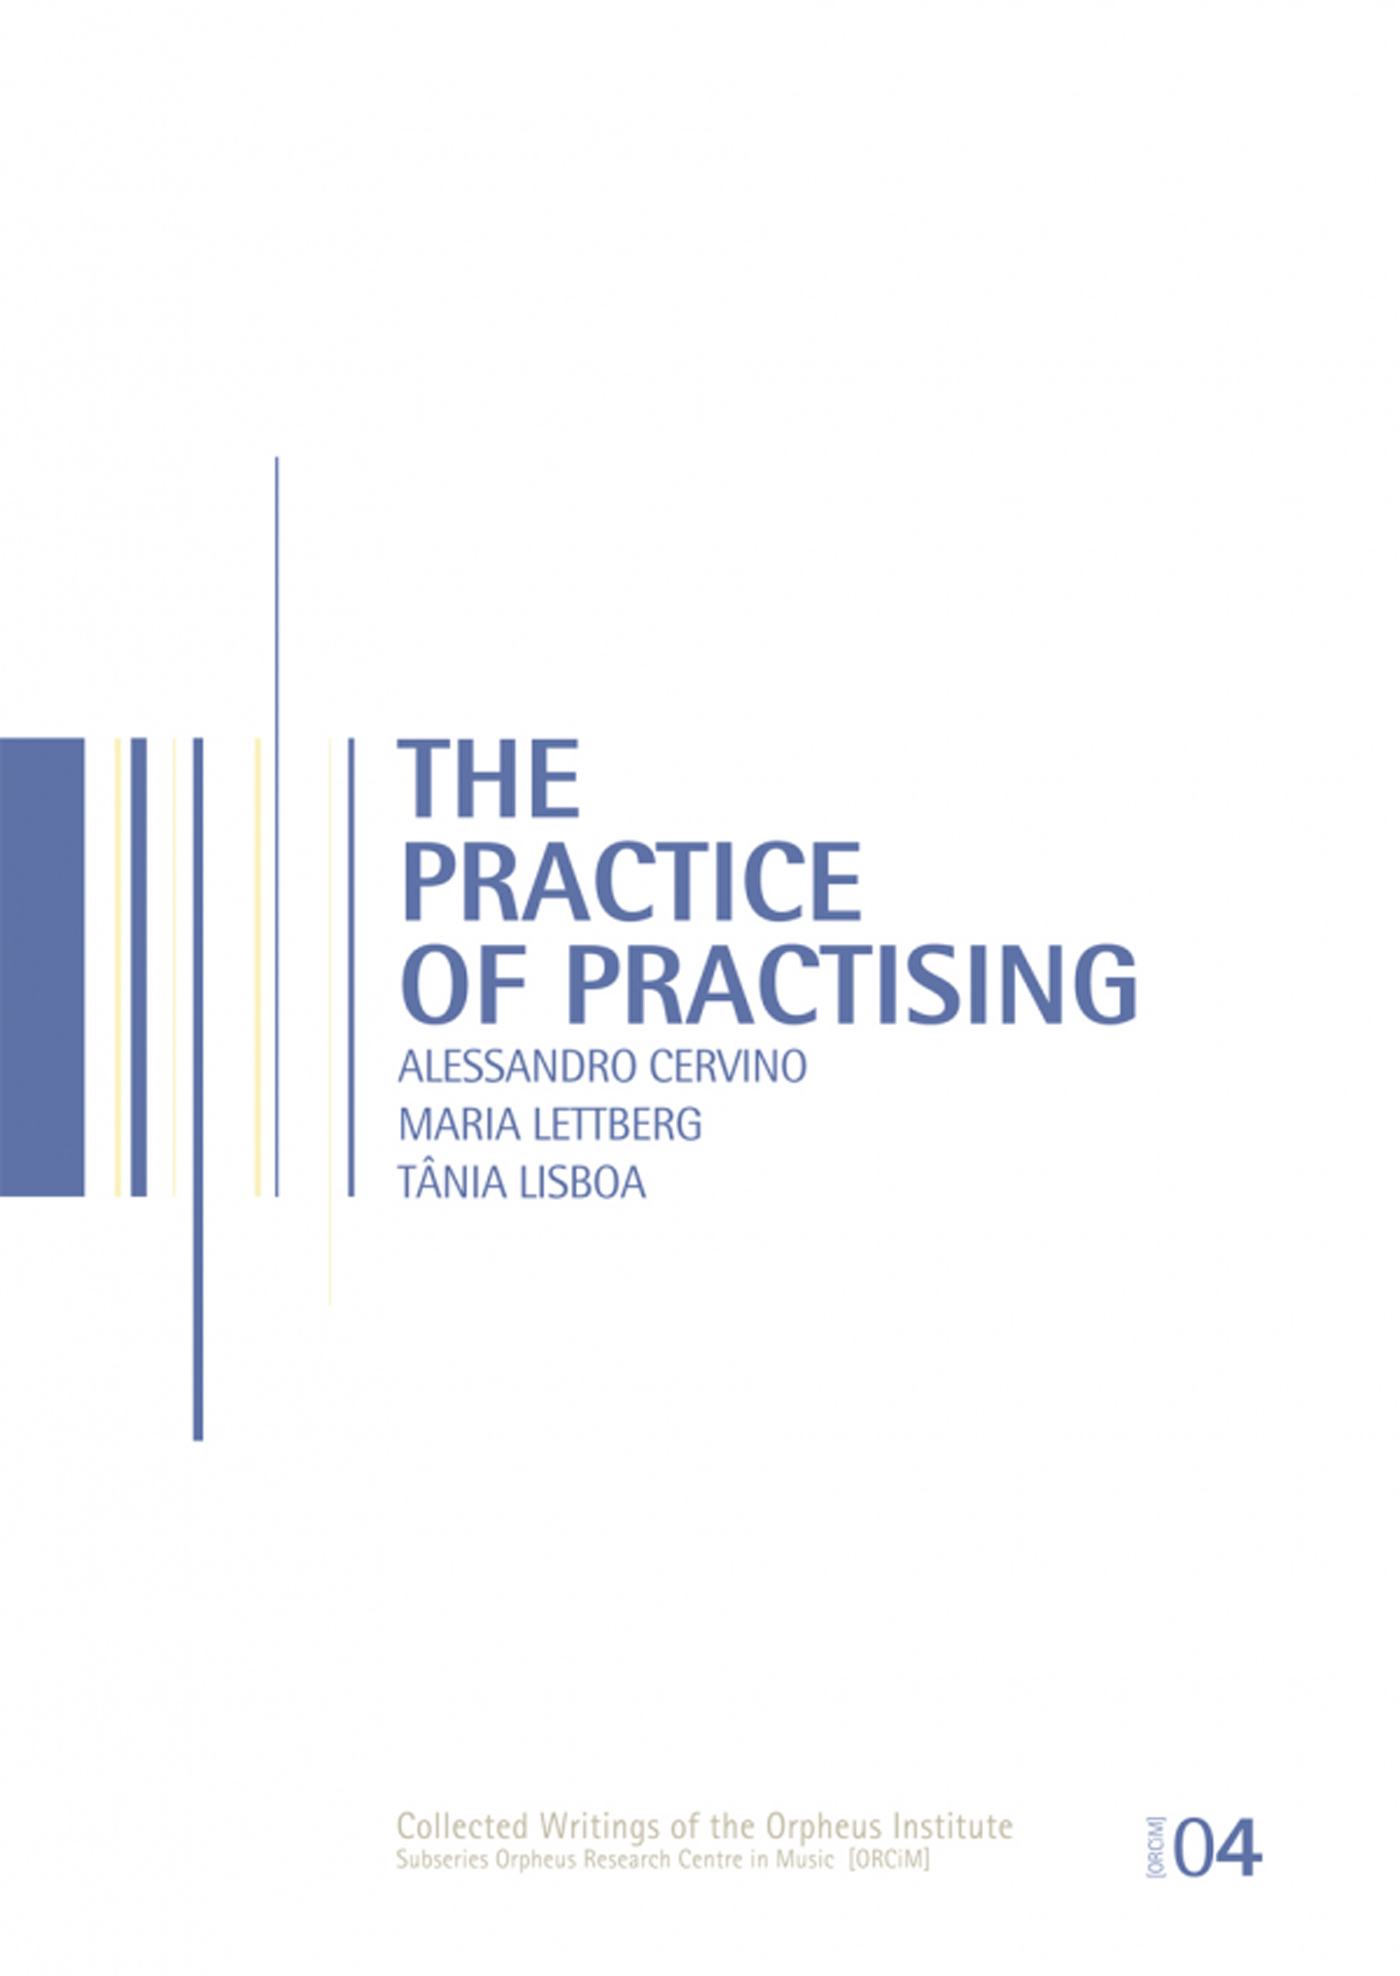 The practice of the practising (Ebook)